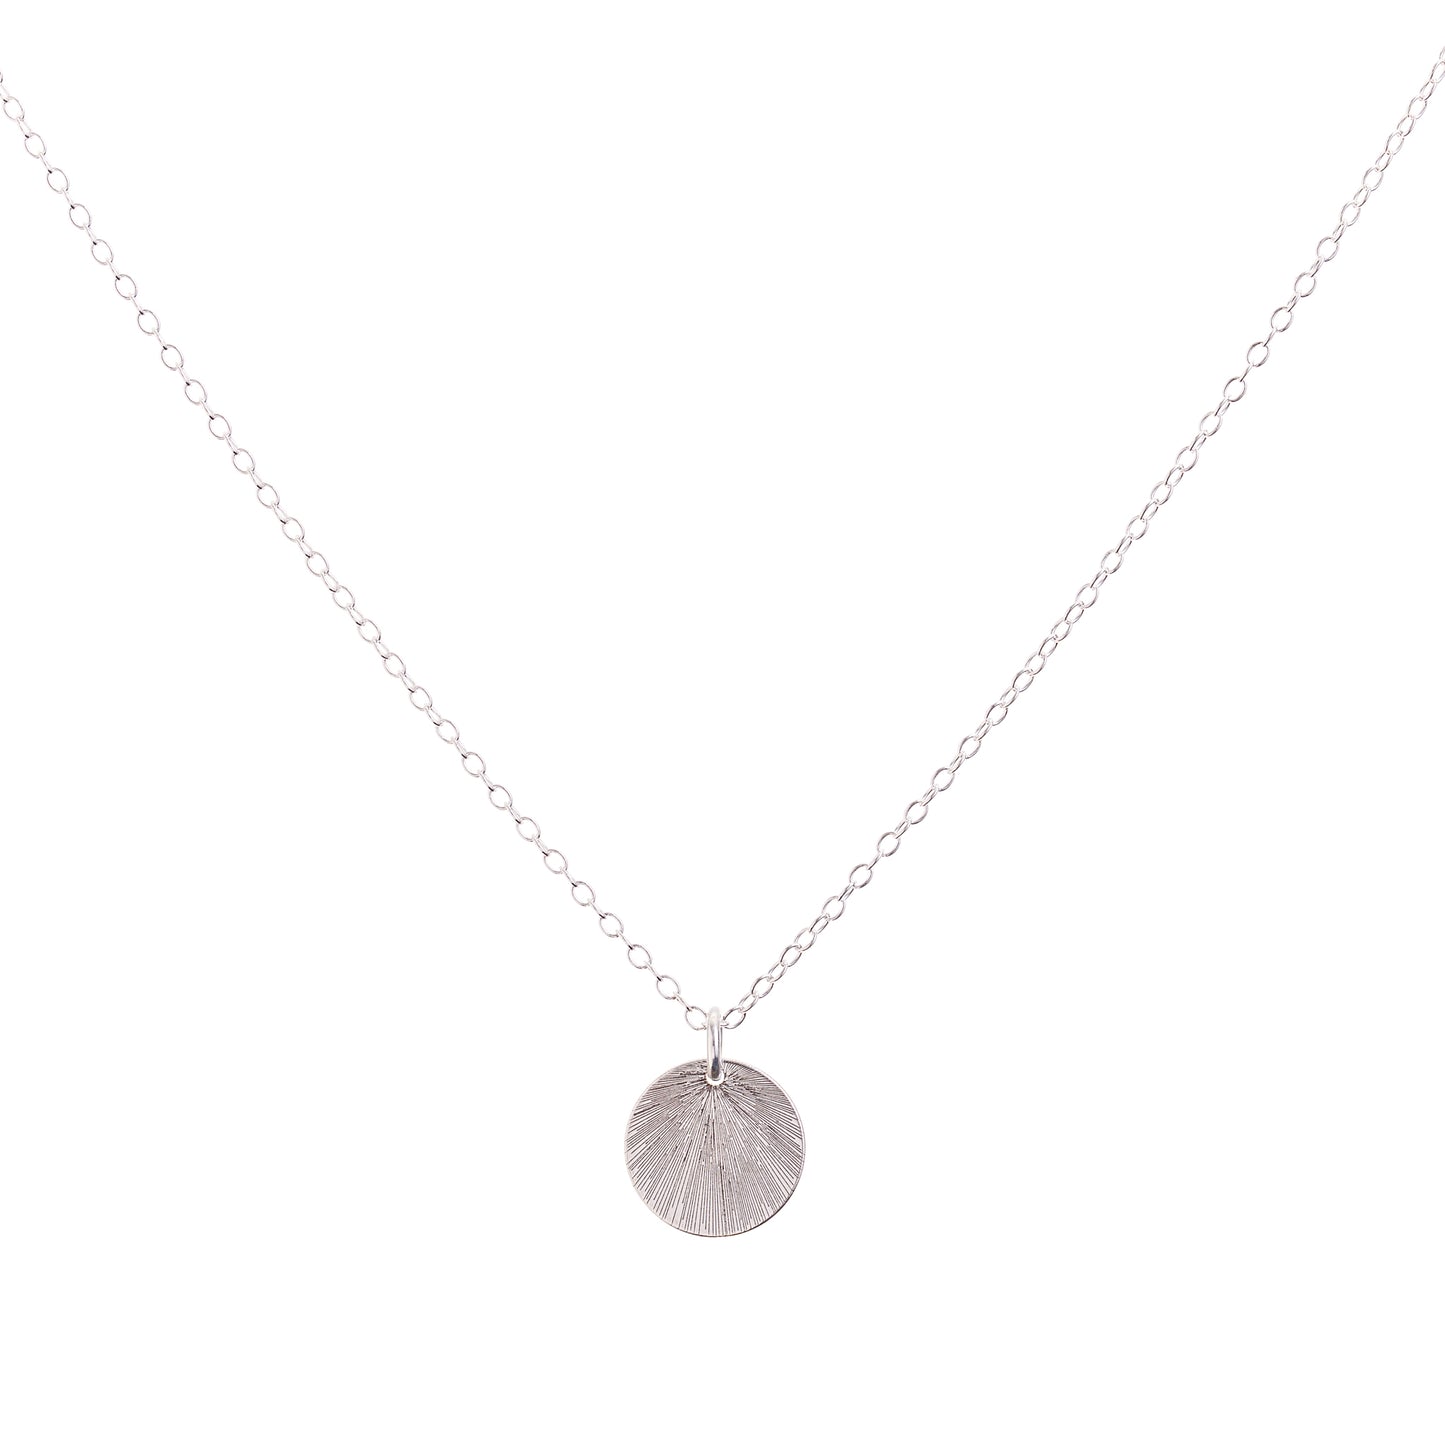 Minimal Silver Etched Medallion Necklace